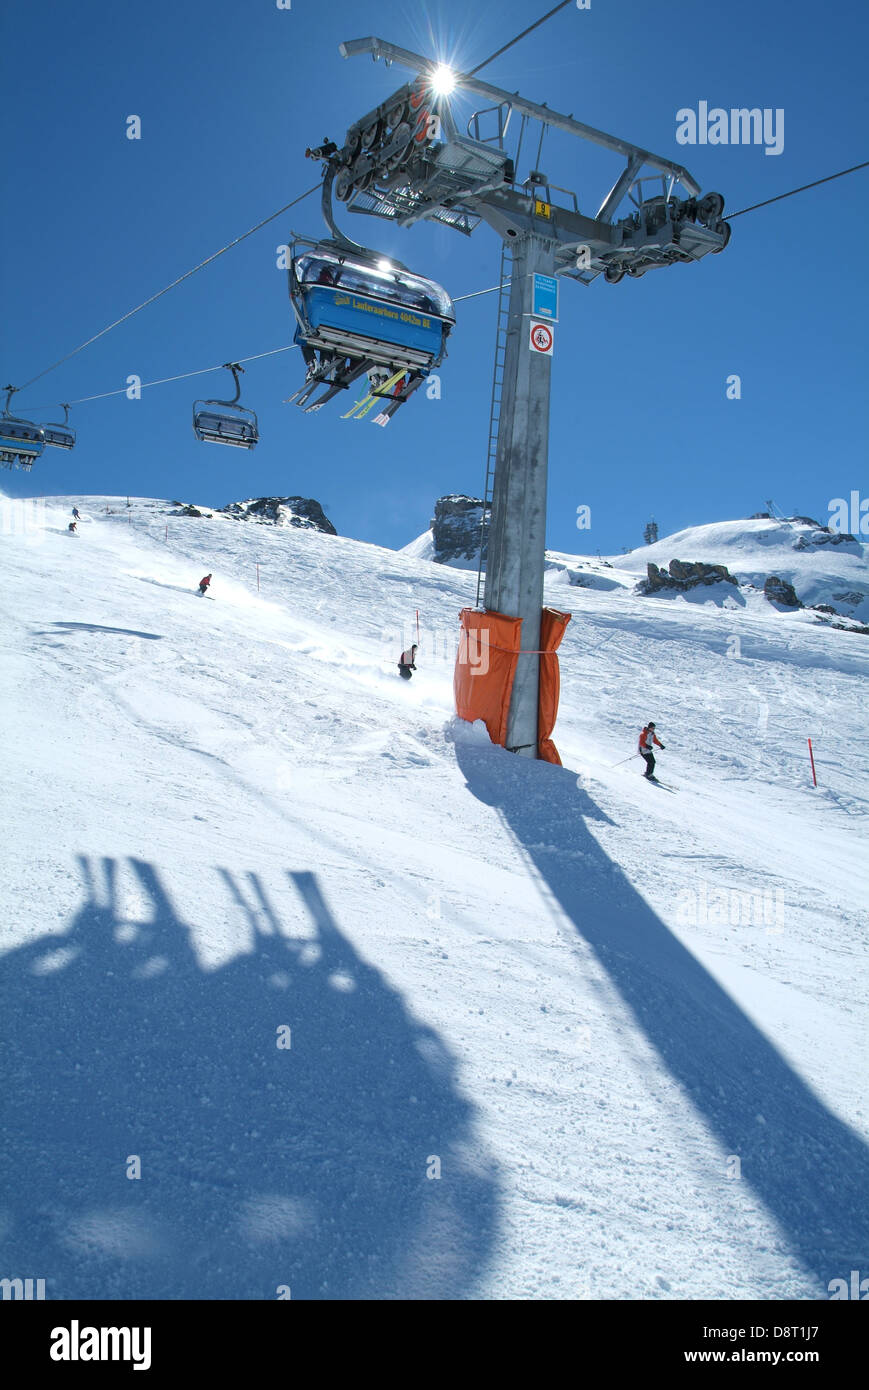 Skilift on mount Titlis over Engelberg on the Swiss alps Stock Photo